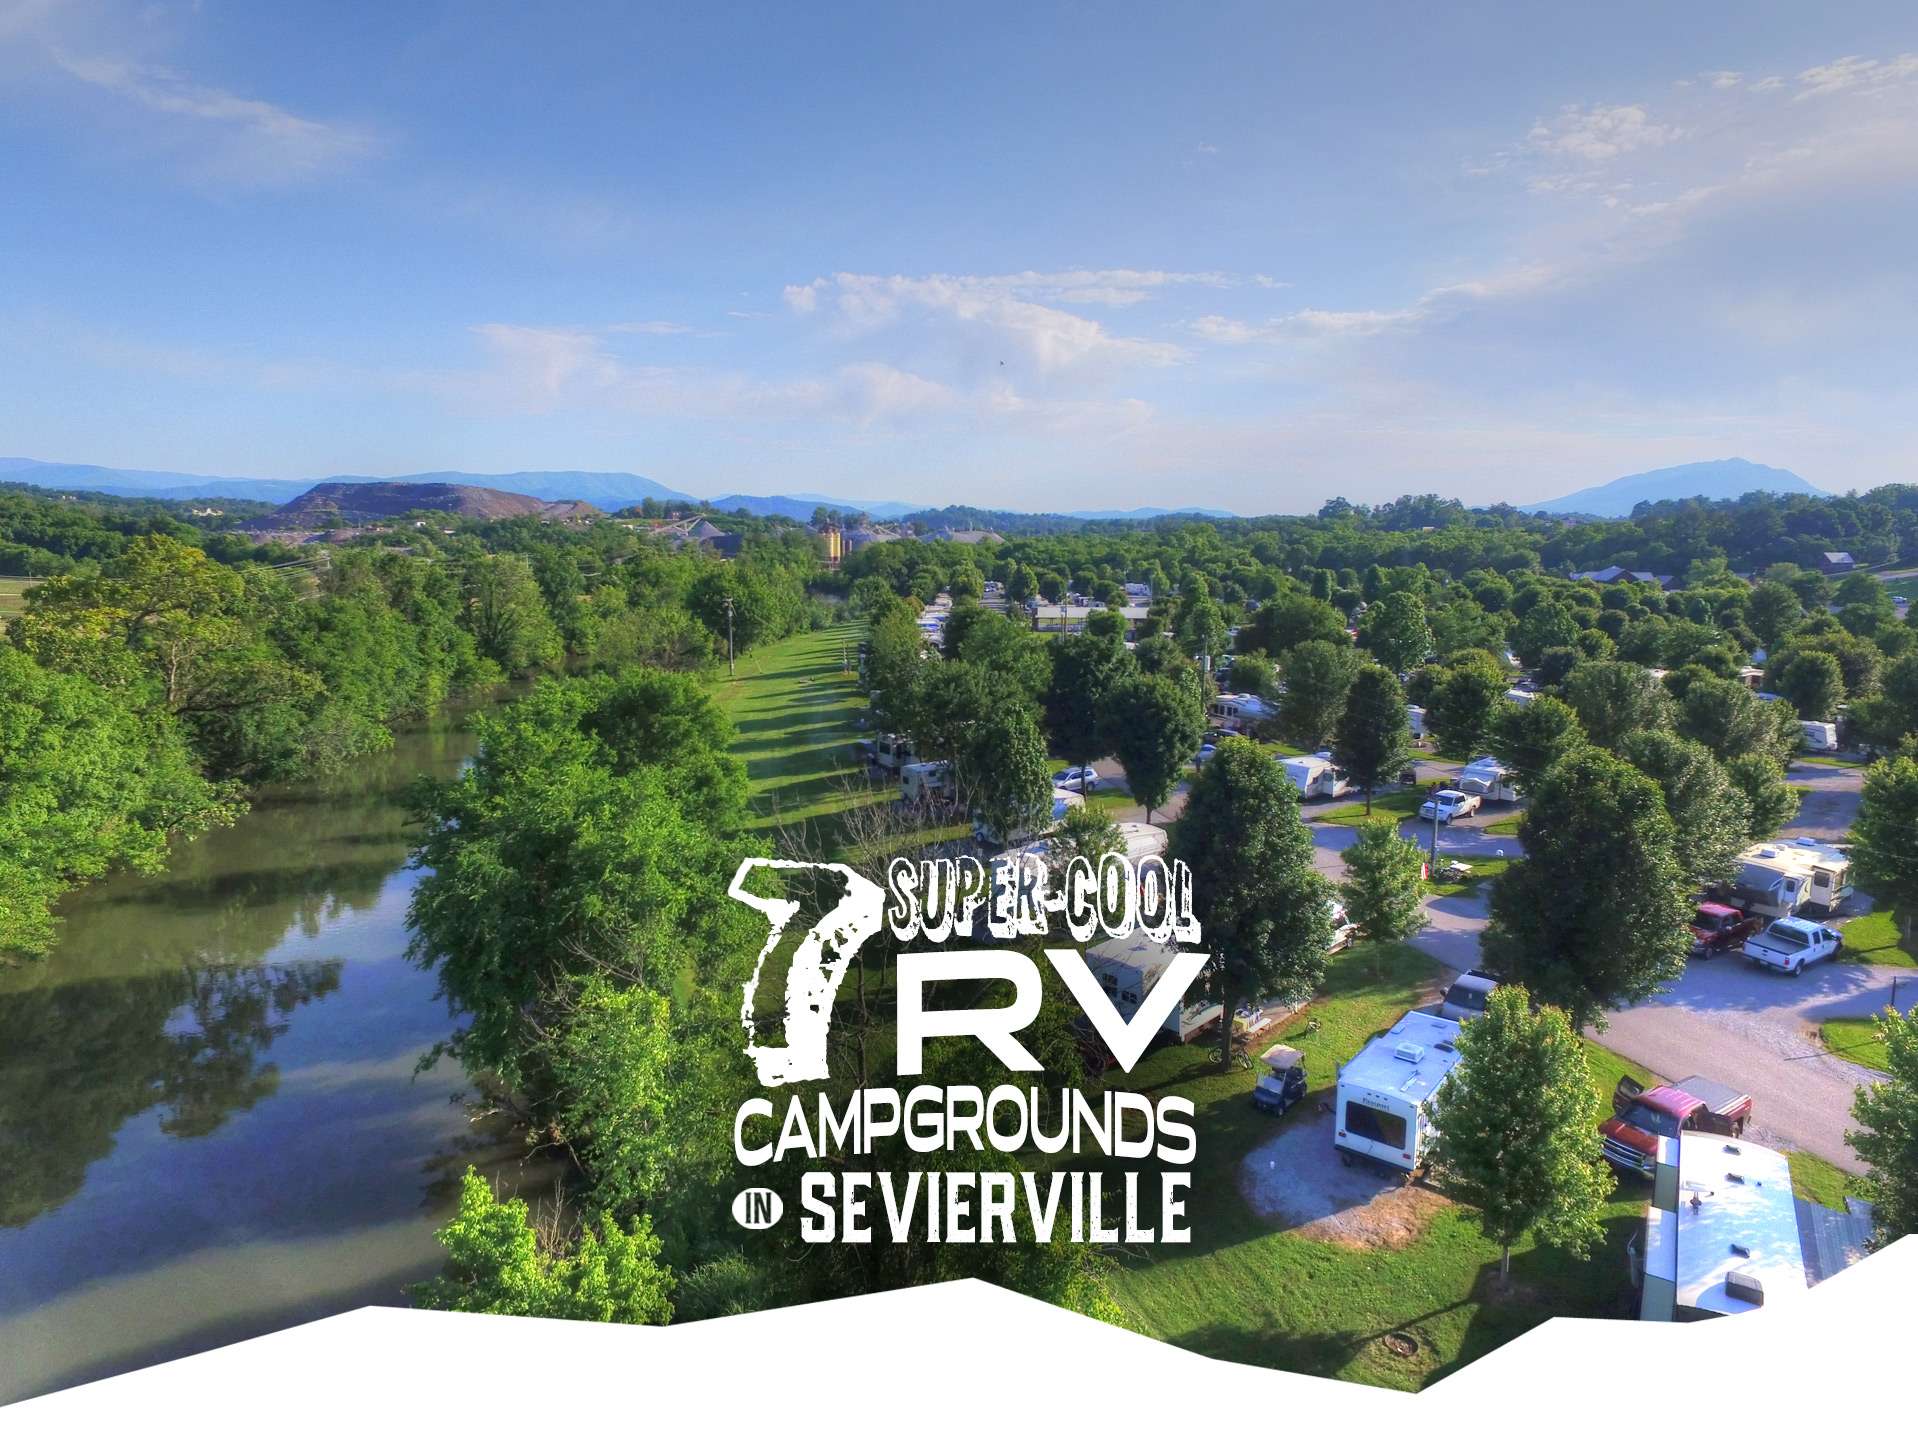 Campgrounds In Sevierville, TN